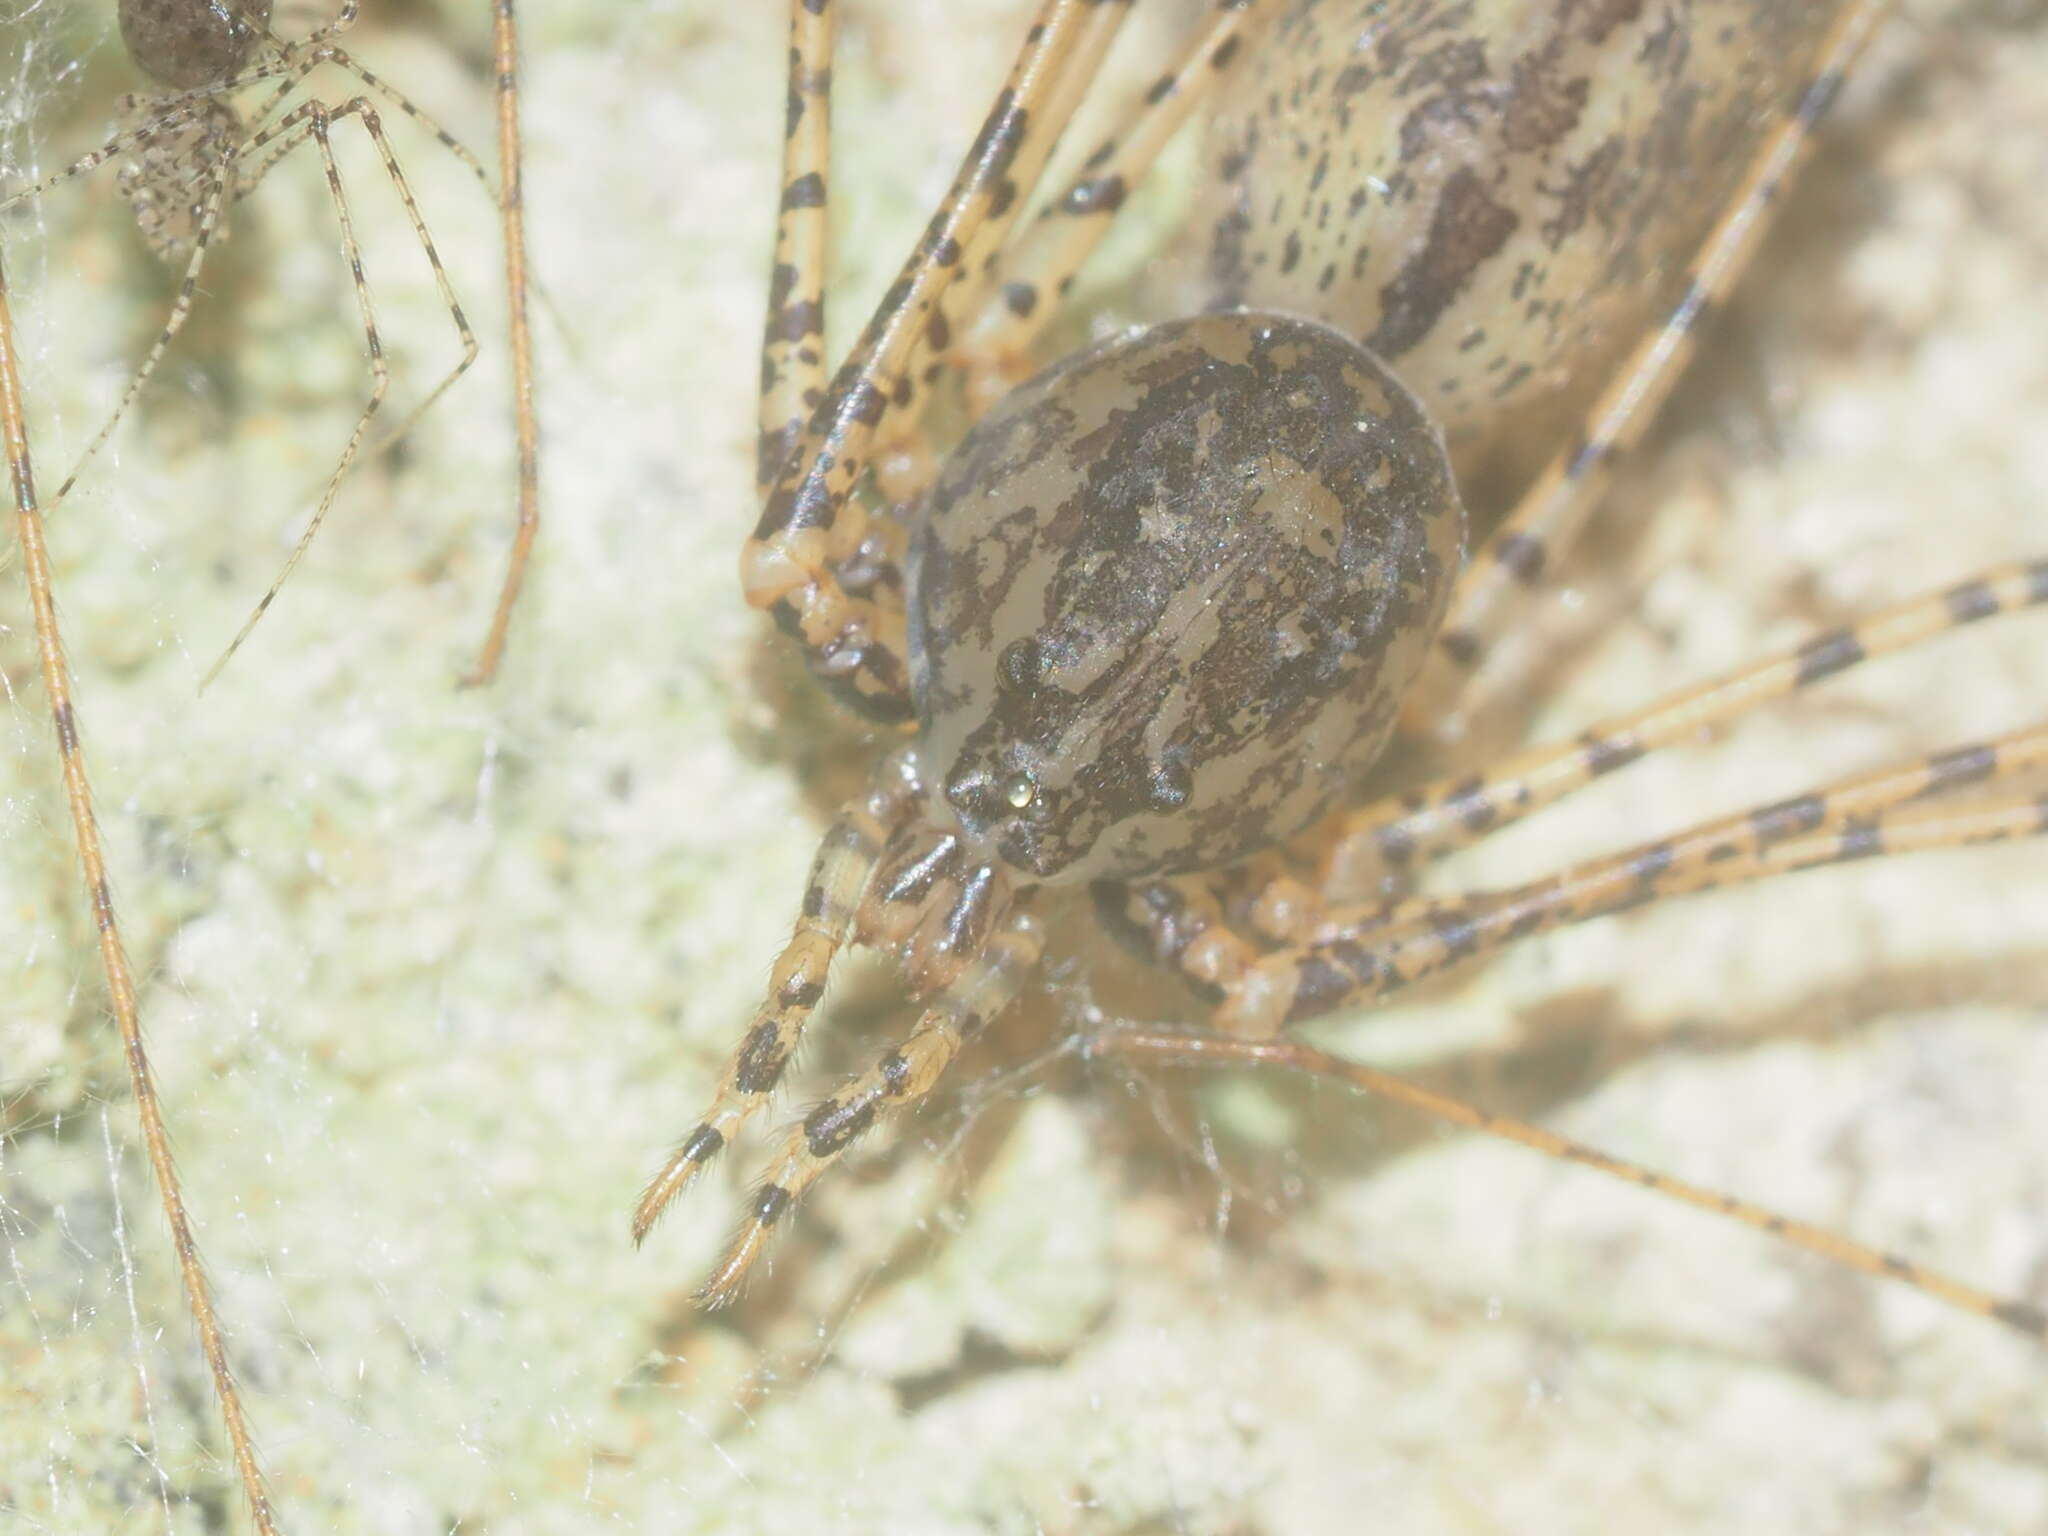 Image of Spitting spider